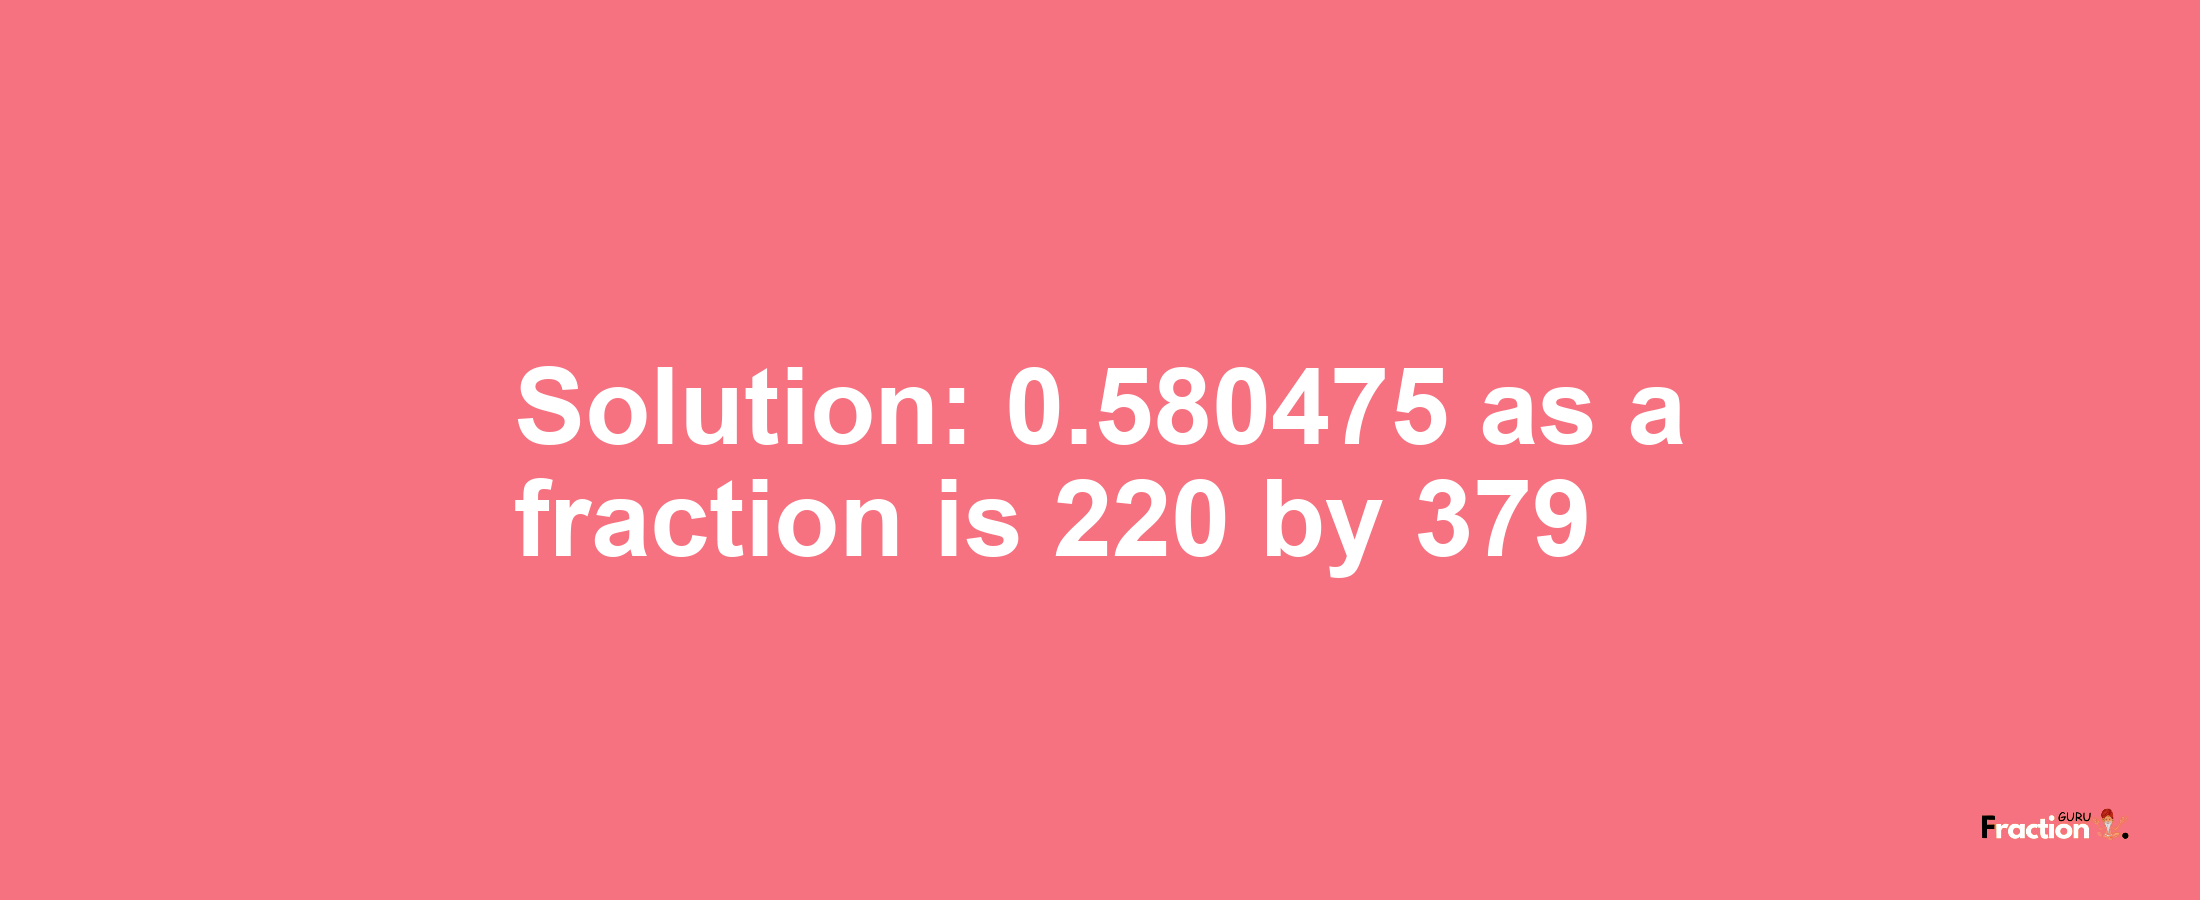 Solution:0.580475 as a fraction is 220/379